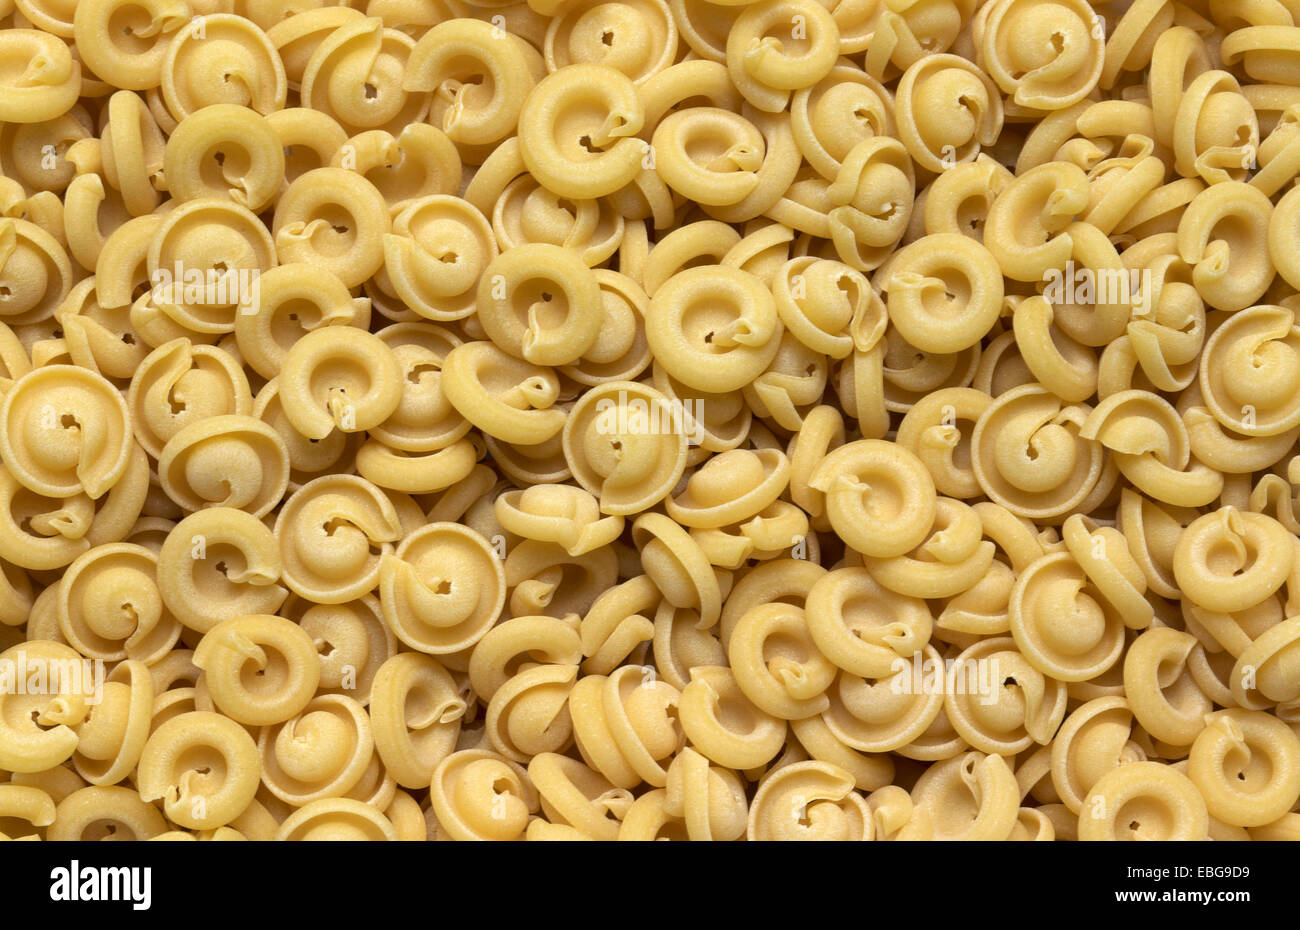 full frame italian pasta background with lots of Insalatonde noodles Stock Photo